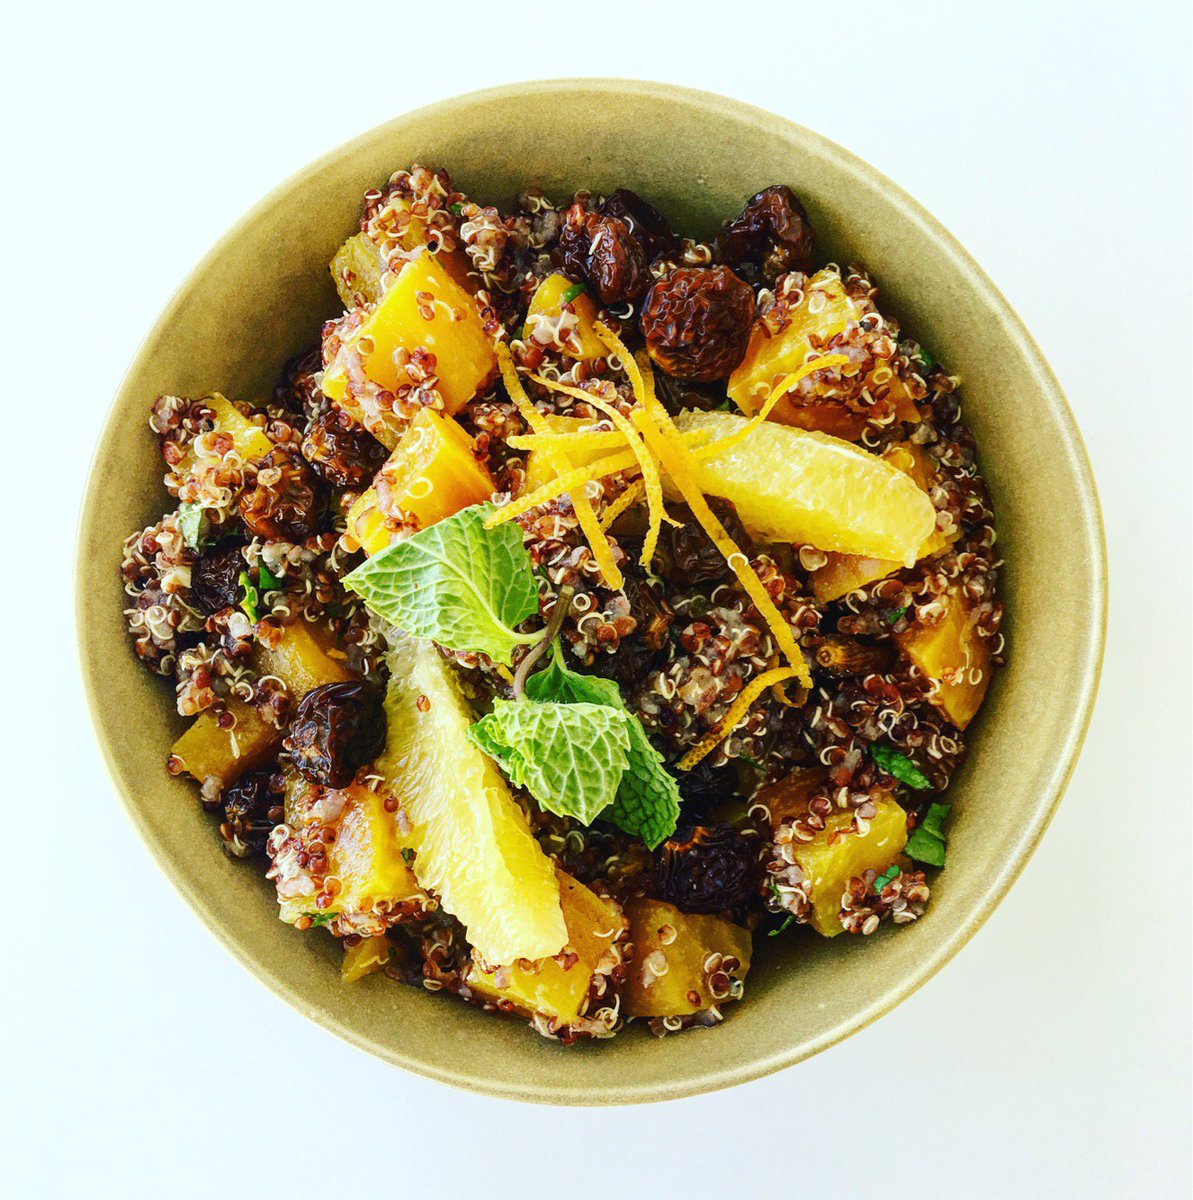 Have you tried our #deliciouslyjuicy golden berries? Enjoy them in this delicious salad by the @veganblondes: bit.ly/2laAlX6